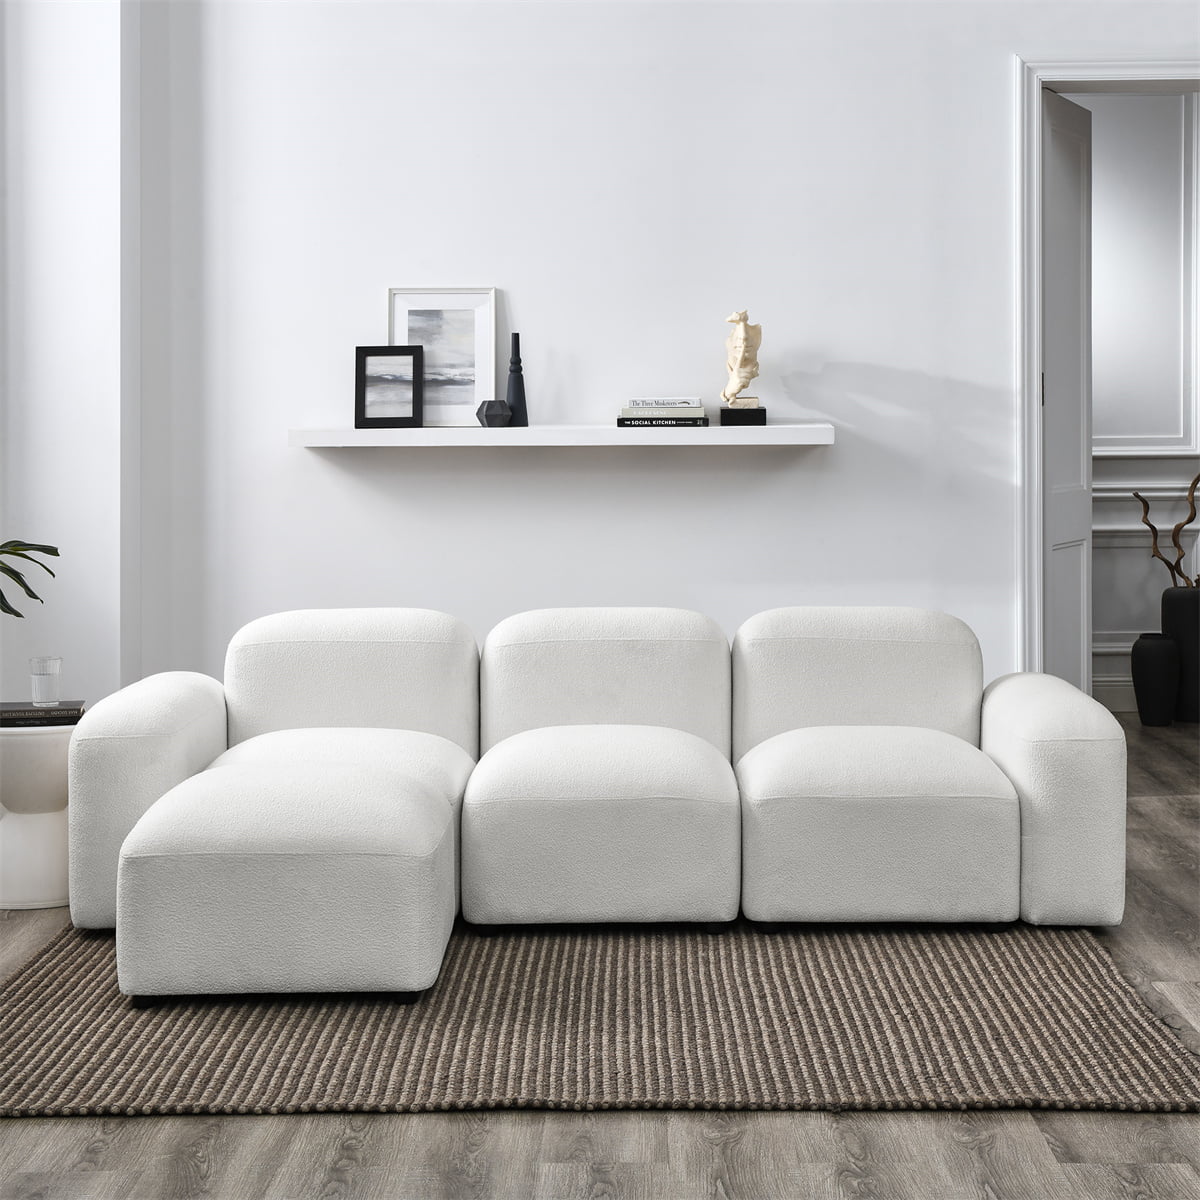 Discreto Relacionado Ropa Modular Sectional Sofa,L Shaped Reversible Sofa,DIY Combination Sofa with  Solid Wood Frame and Padded Cushion,Single Sofa Chair and  Ottoman,Upholstered Couch for Living Room Office Hotel, Ivory - Walmart.com